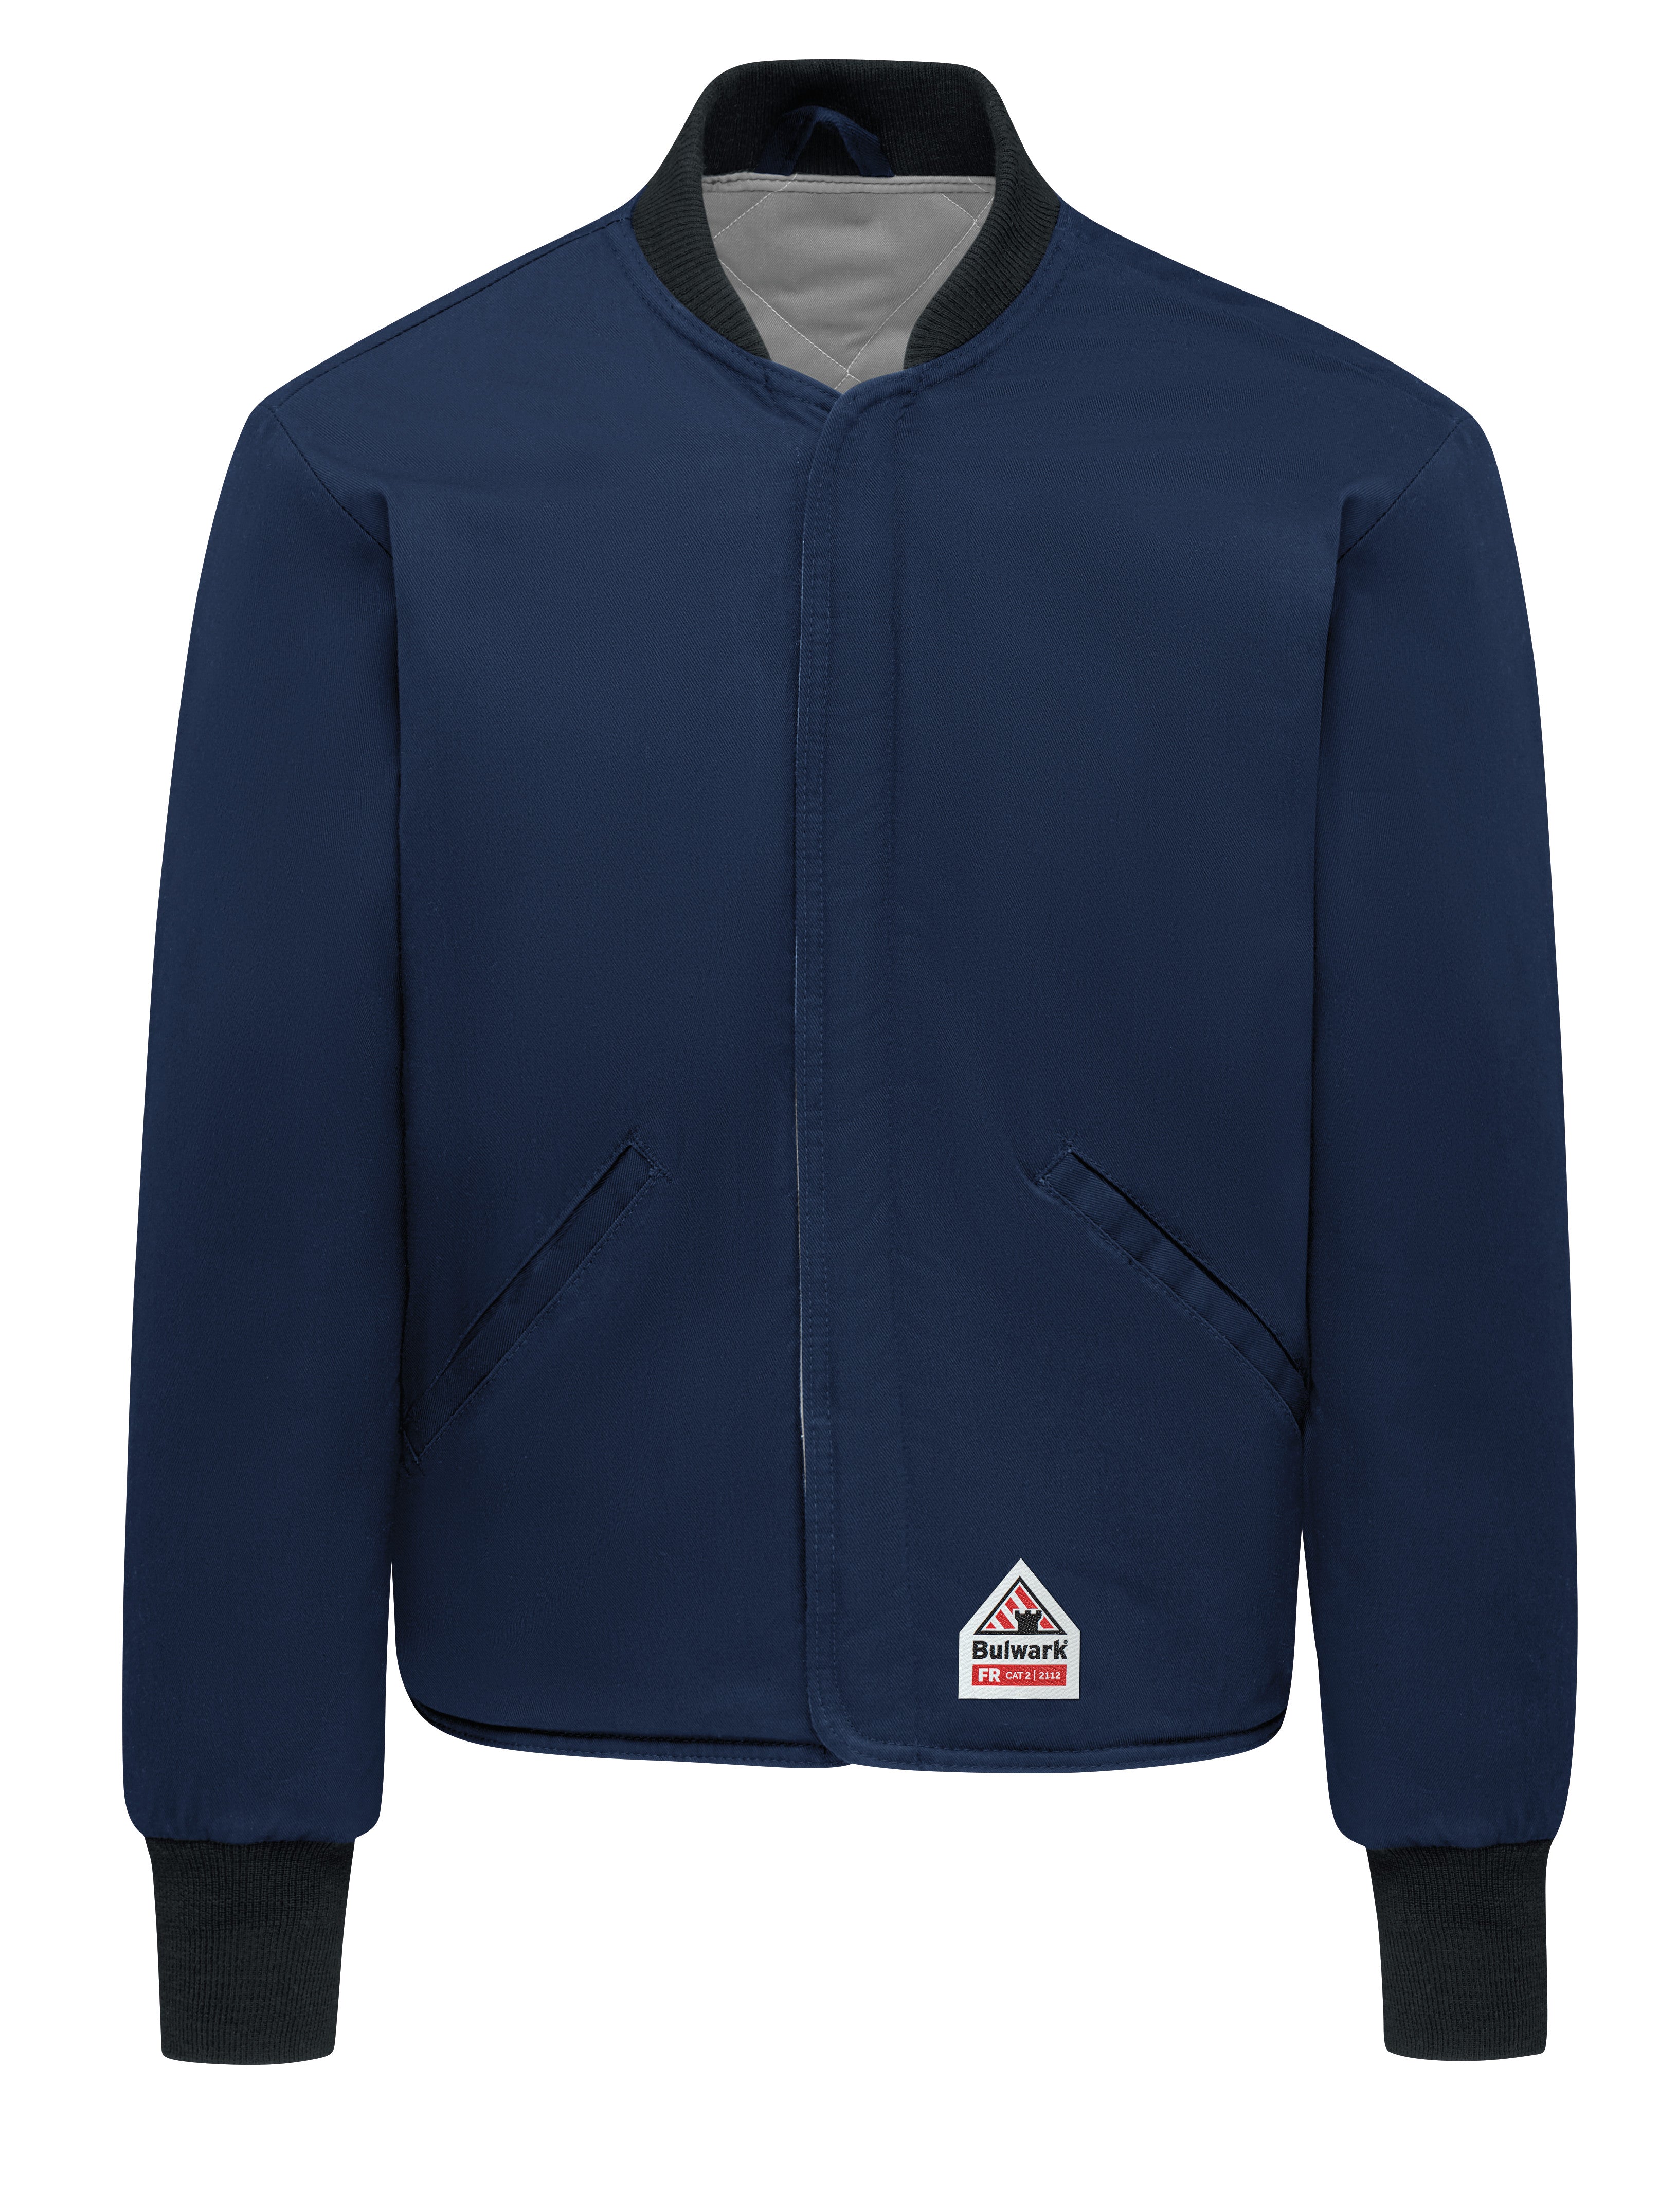 Outerwear - Jacket LLL8 - Navy